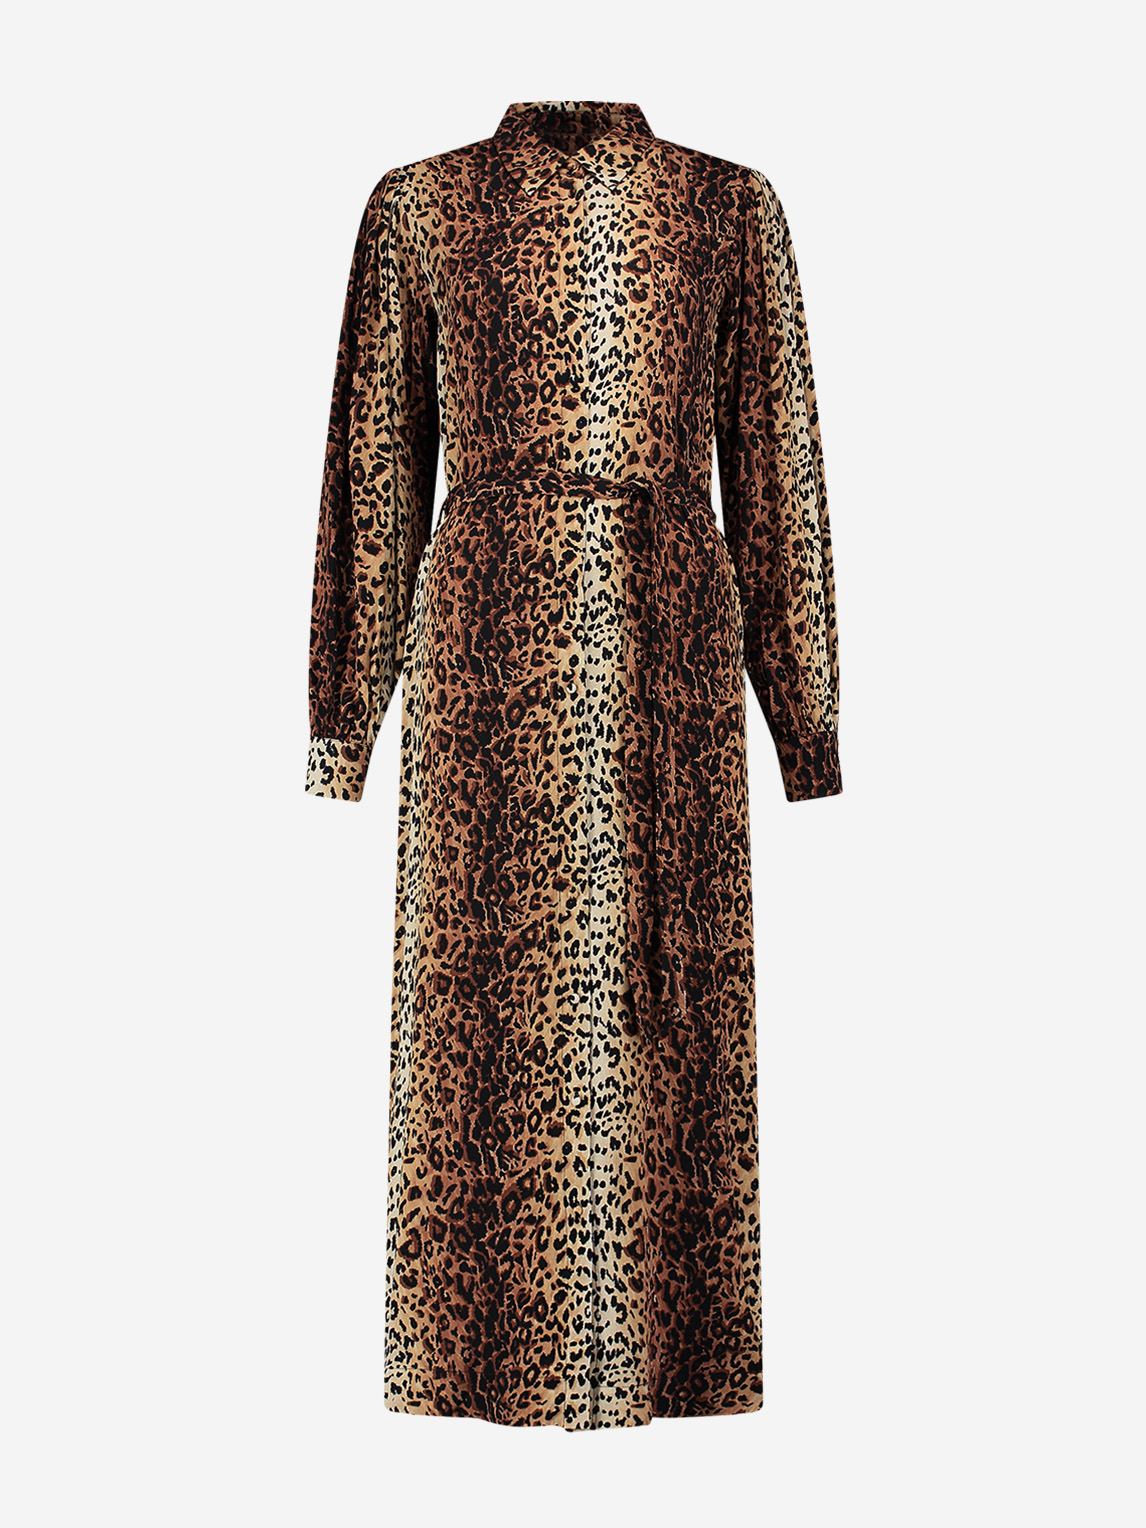 Leopard print maxi Dress with wide sleeves 